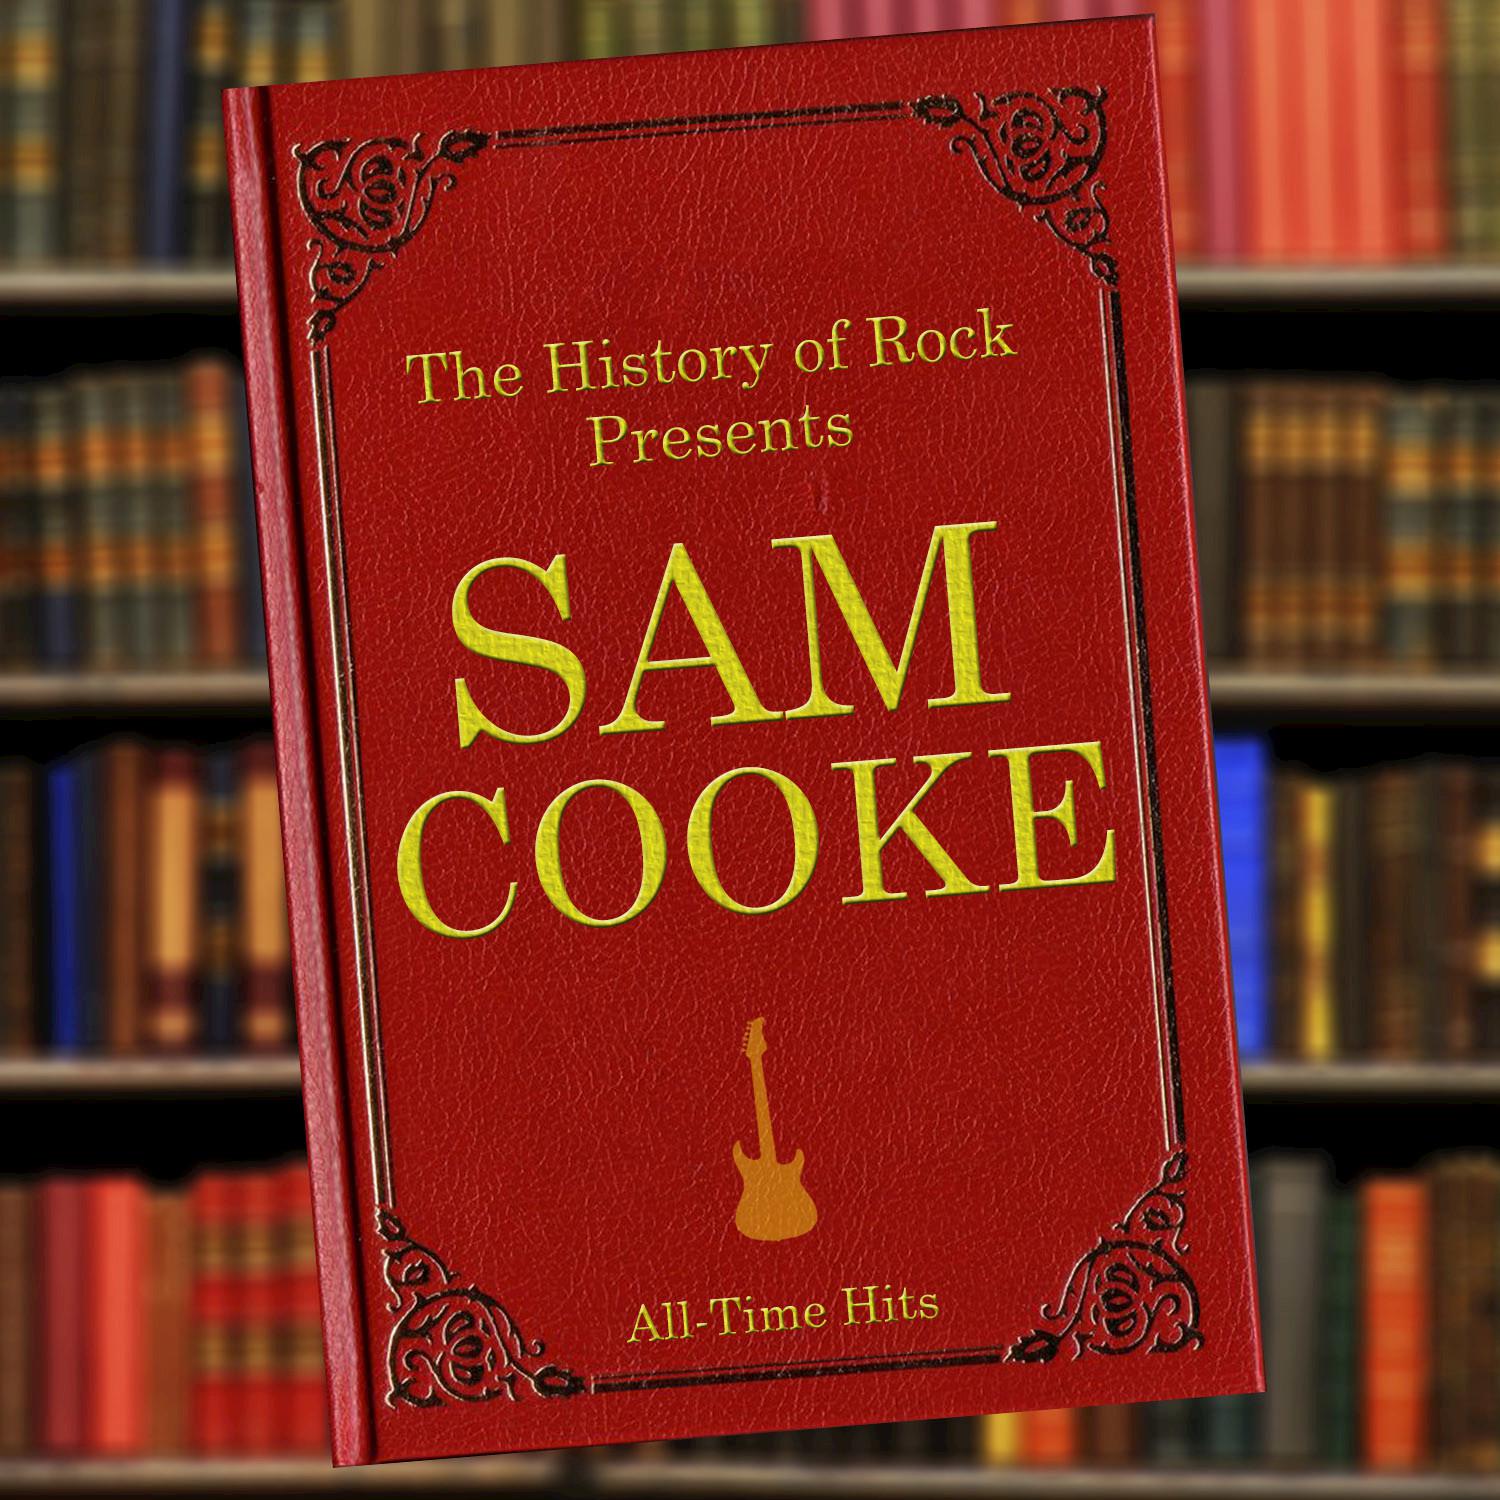 The History of Rock Presents Sam Cooke